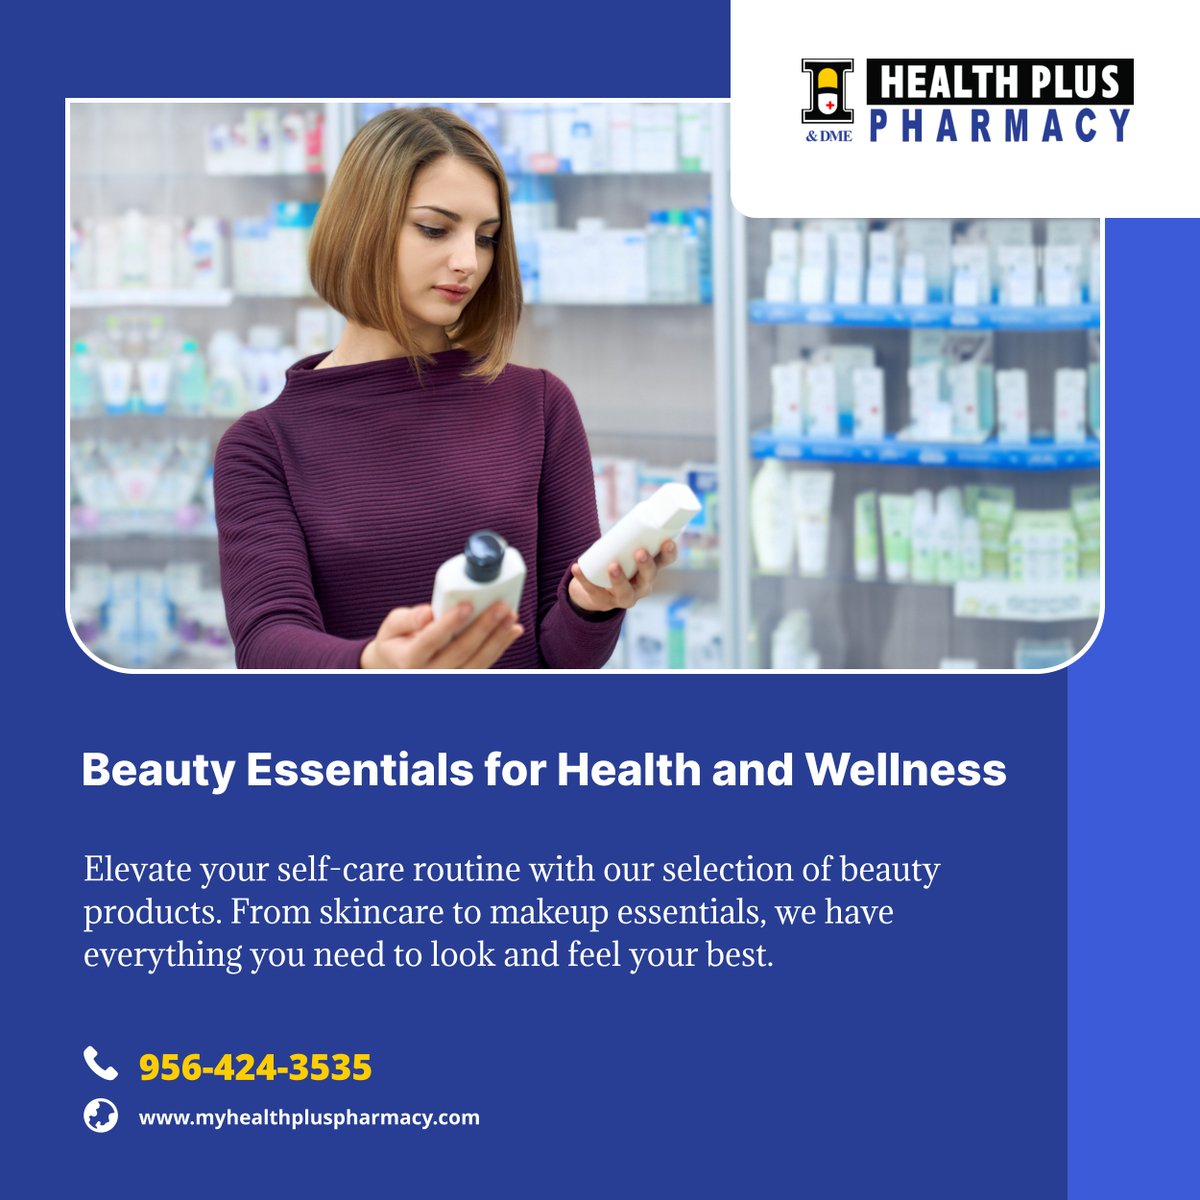 Discover our range of beauty products to enhance your self-care routine. From skincare to makeup essentials, prioritize your health and wellness with us. 

#BeautyEssentials #MissionTexas #Pharmacy